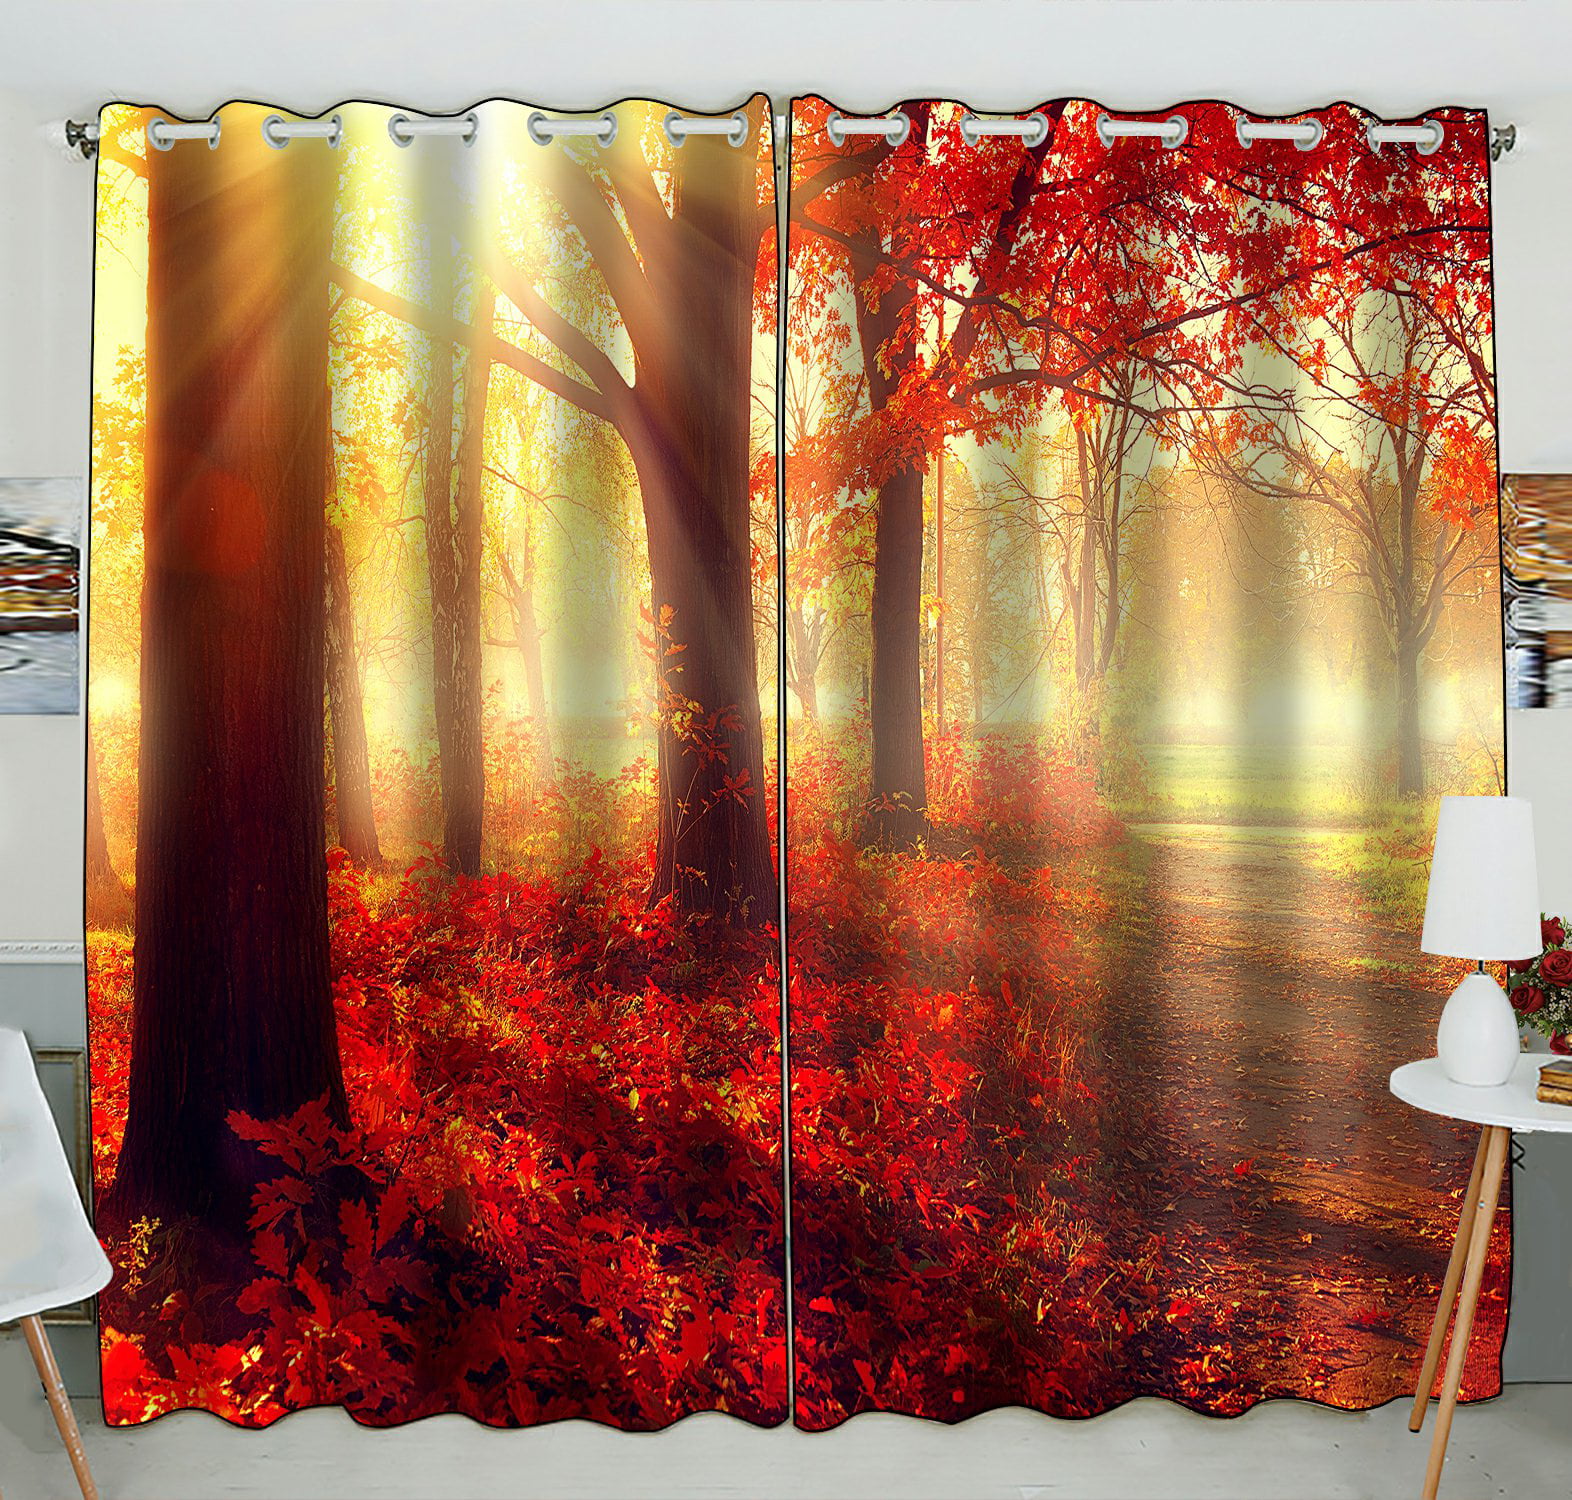 PHFZK Landscape Nature Scene Window Curtain, Autumn Trees and Leaves in ...